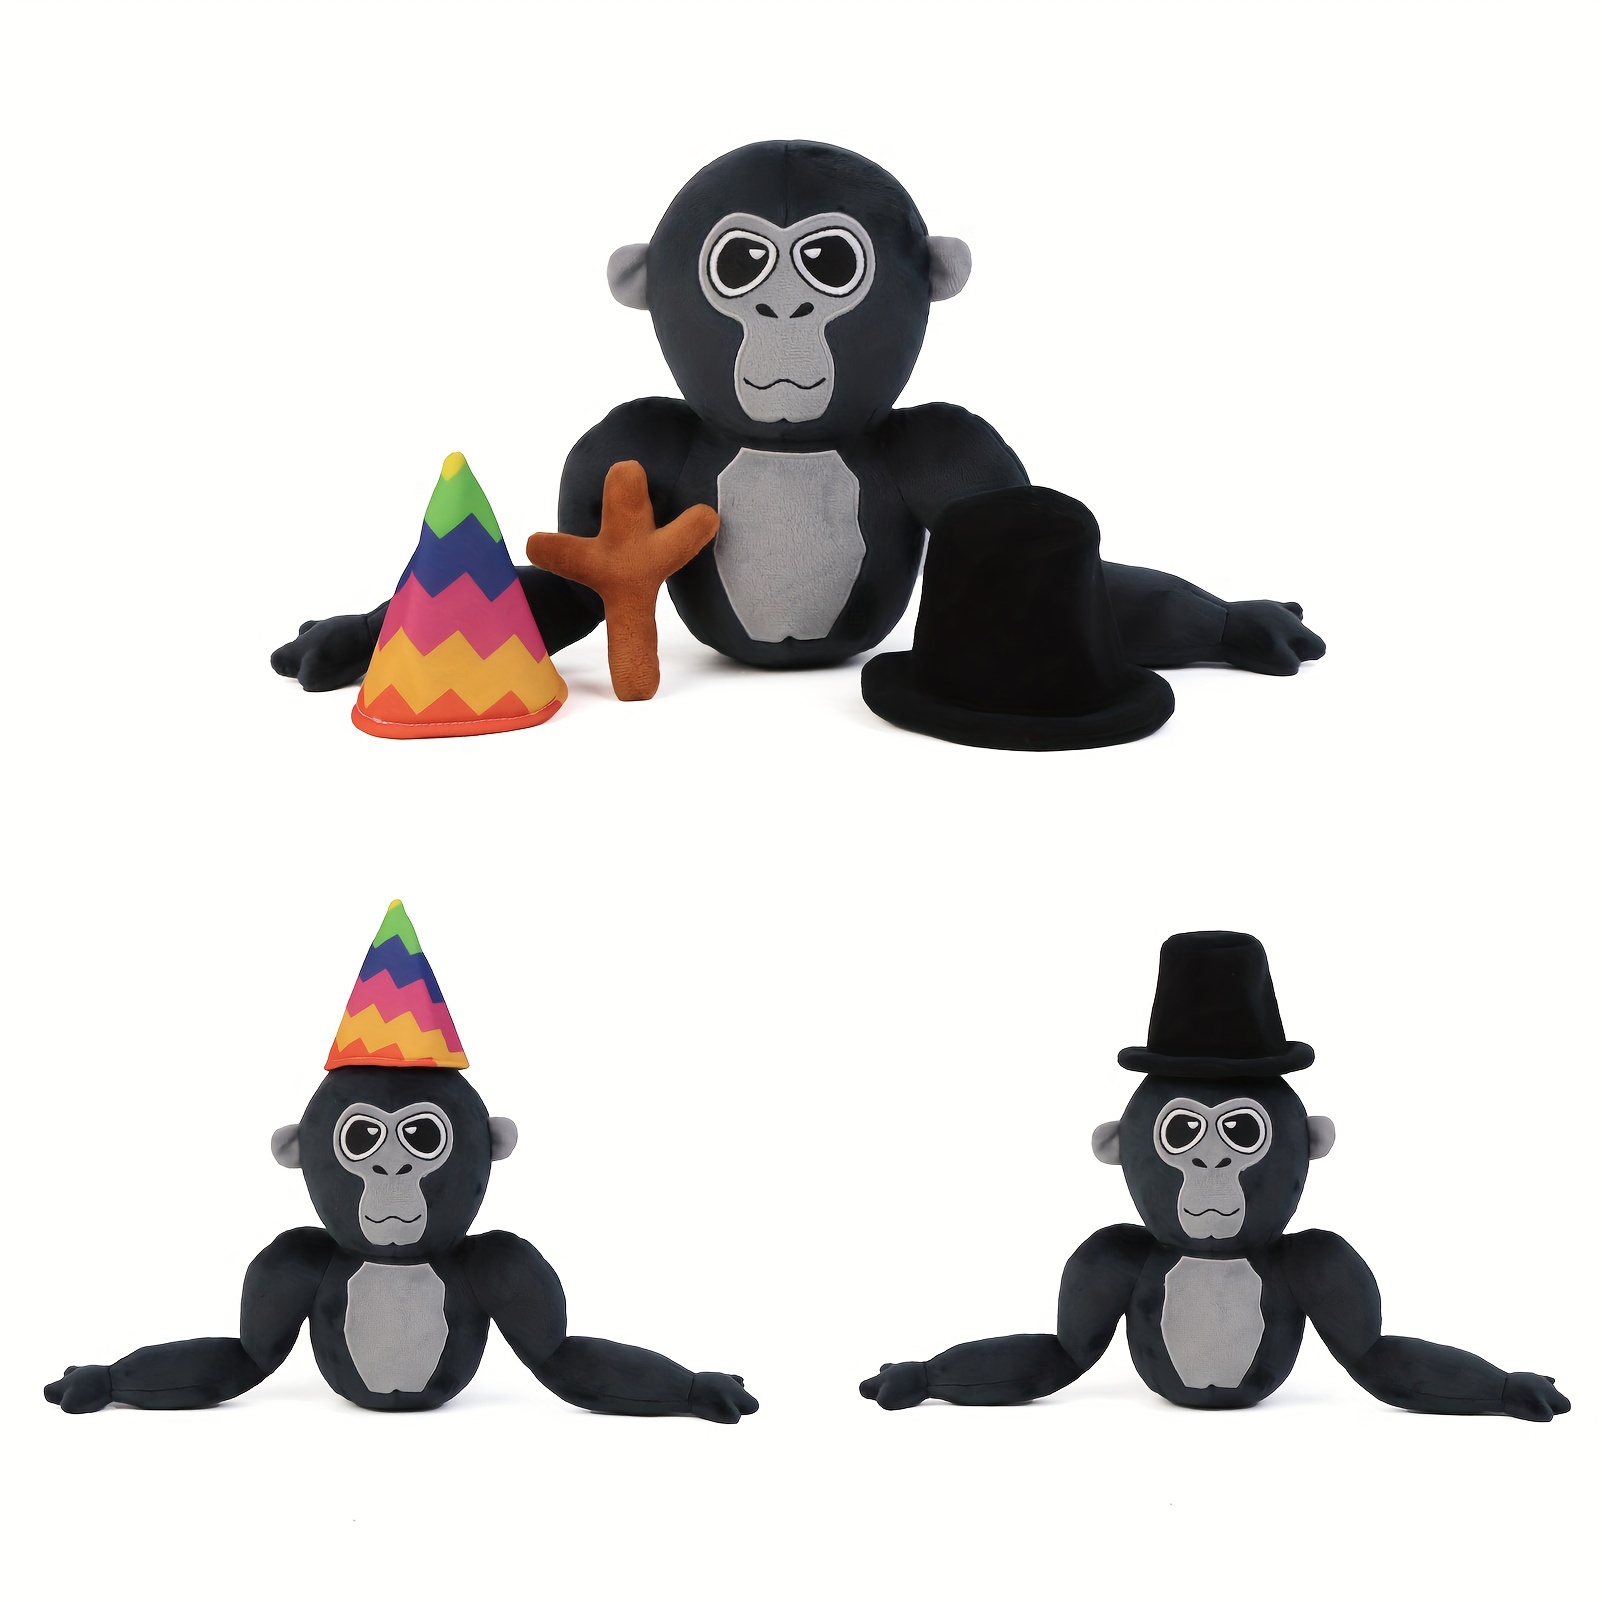 

40cm/15.75in Gorilla Tag Monkey Plush Toys Kawaii Black Monkey Stuffed Animals Plush Jeff Plush Doll Easter Halloween And Christmas Gifts Anime Game Toys Gift For Gamer Fans